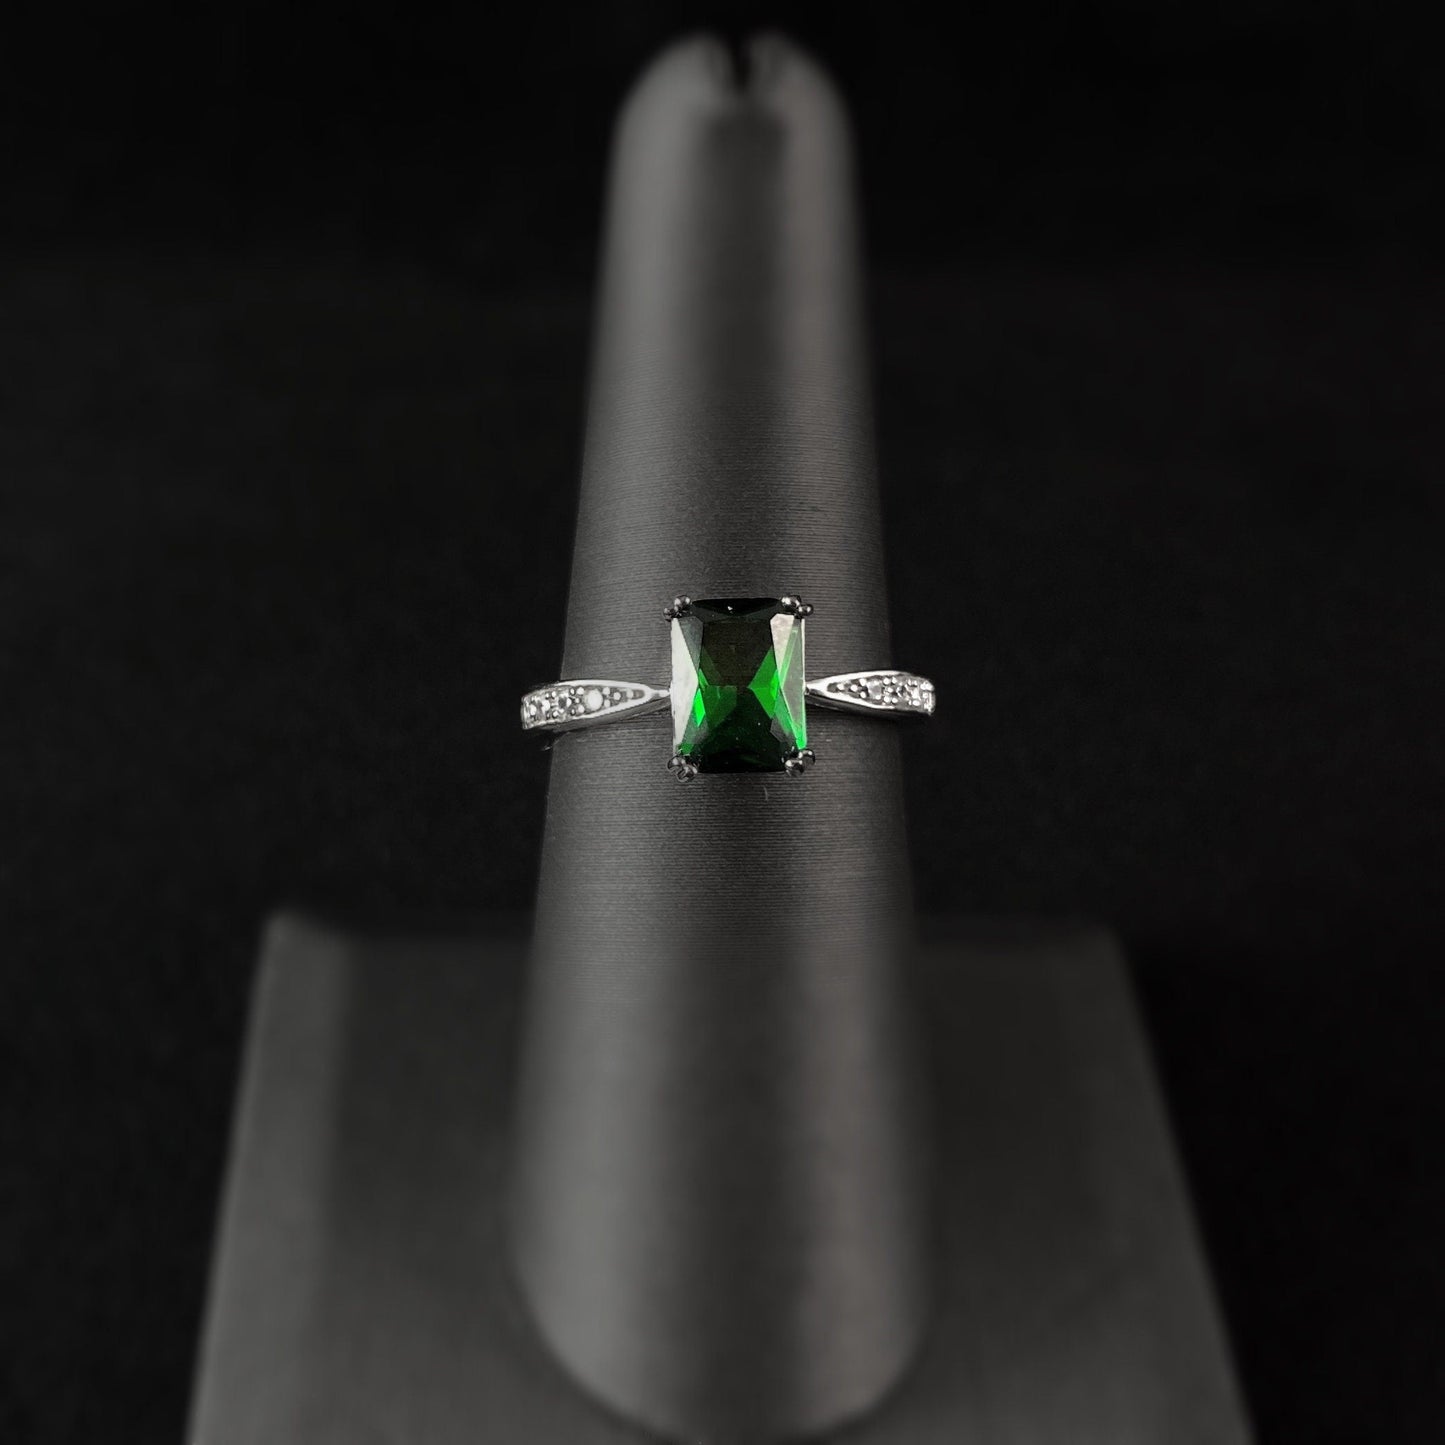 Elegant Silver Ring with Emerald Green Crystal - Size 7, Genevive